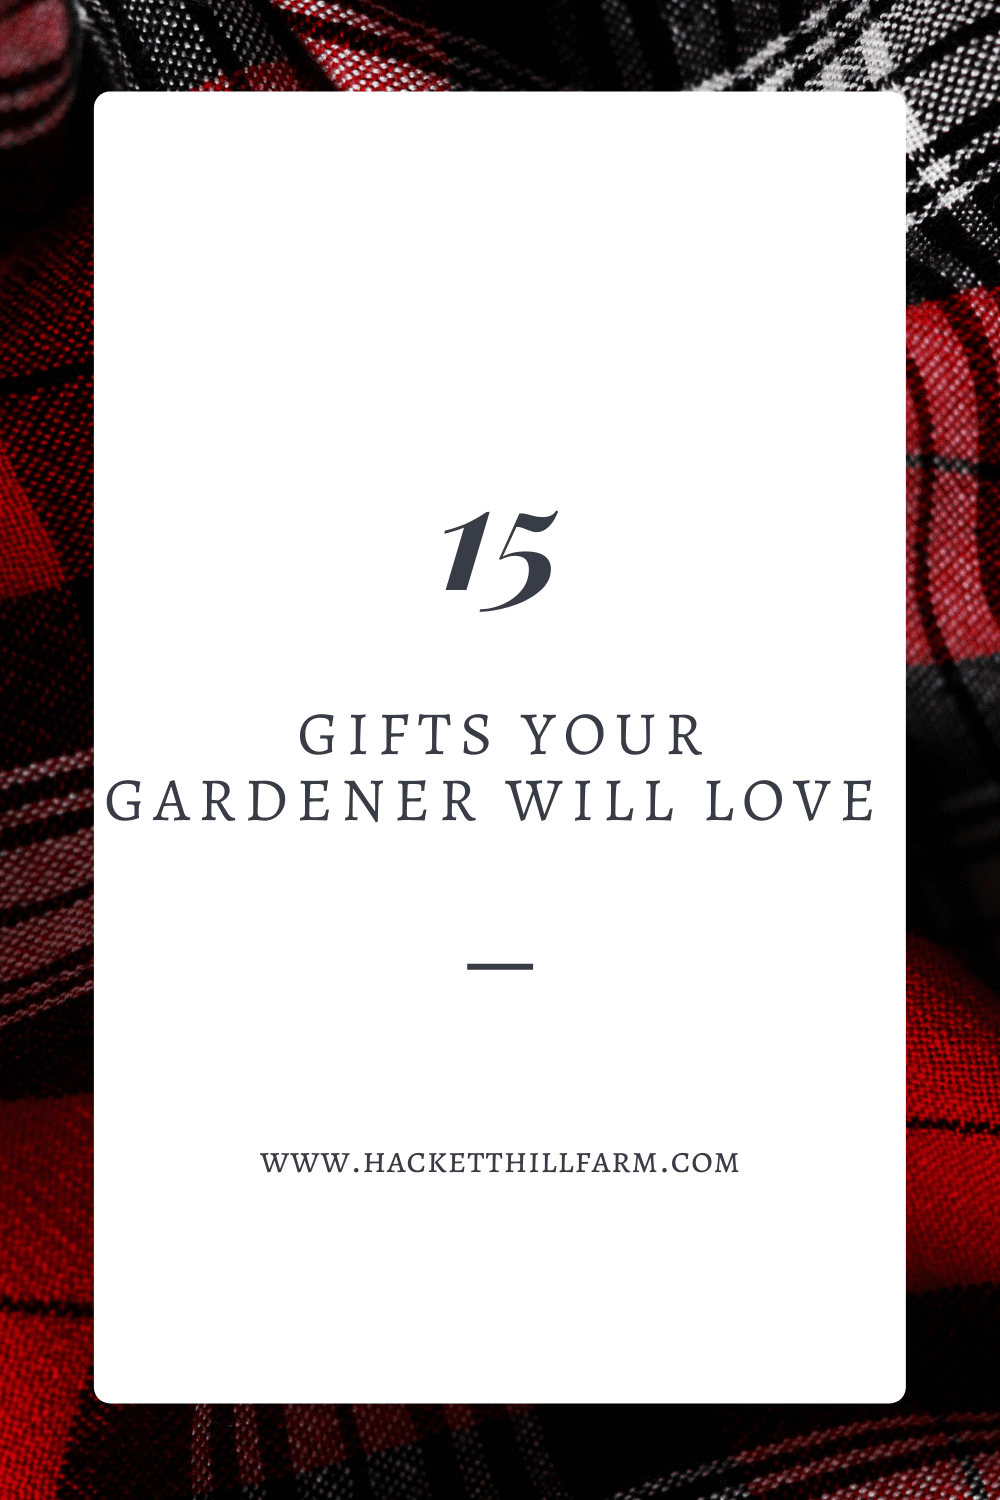 gifts your gardener will love